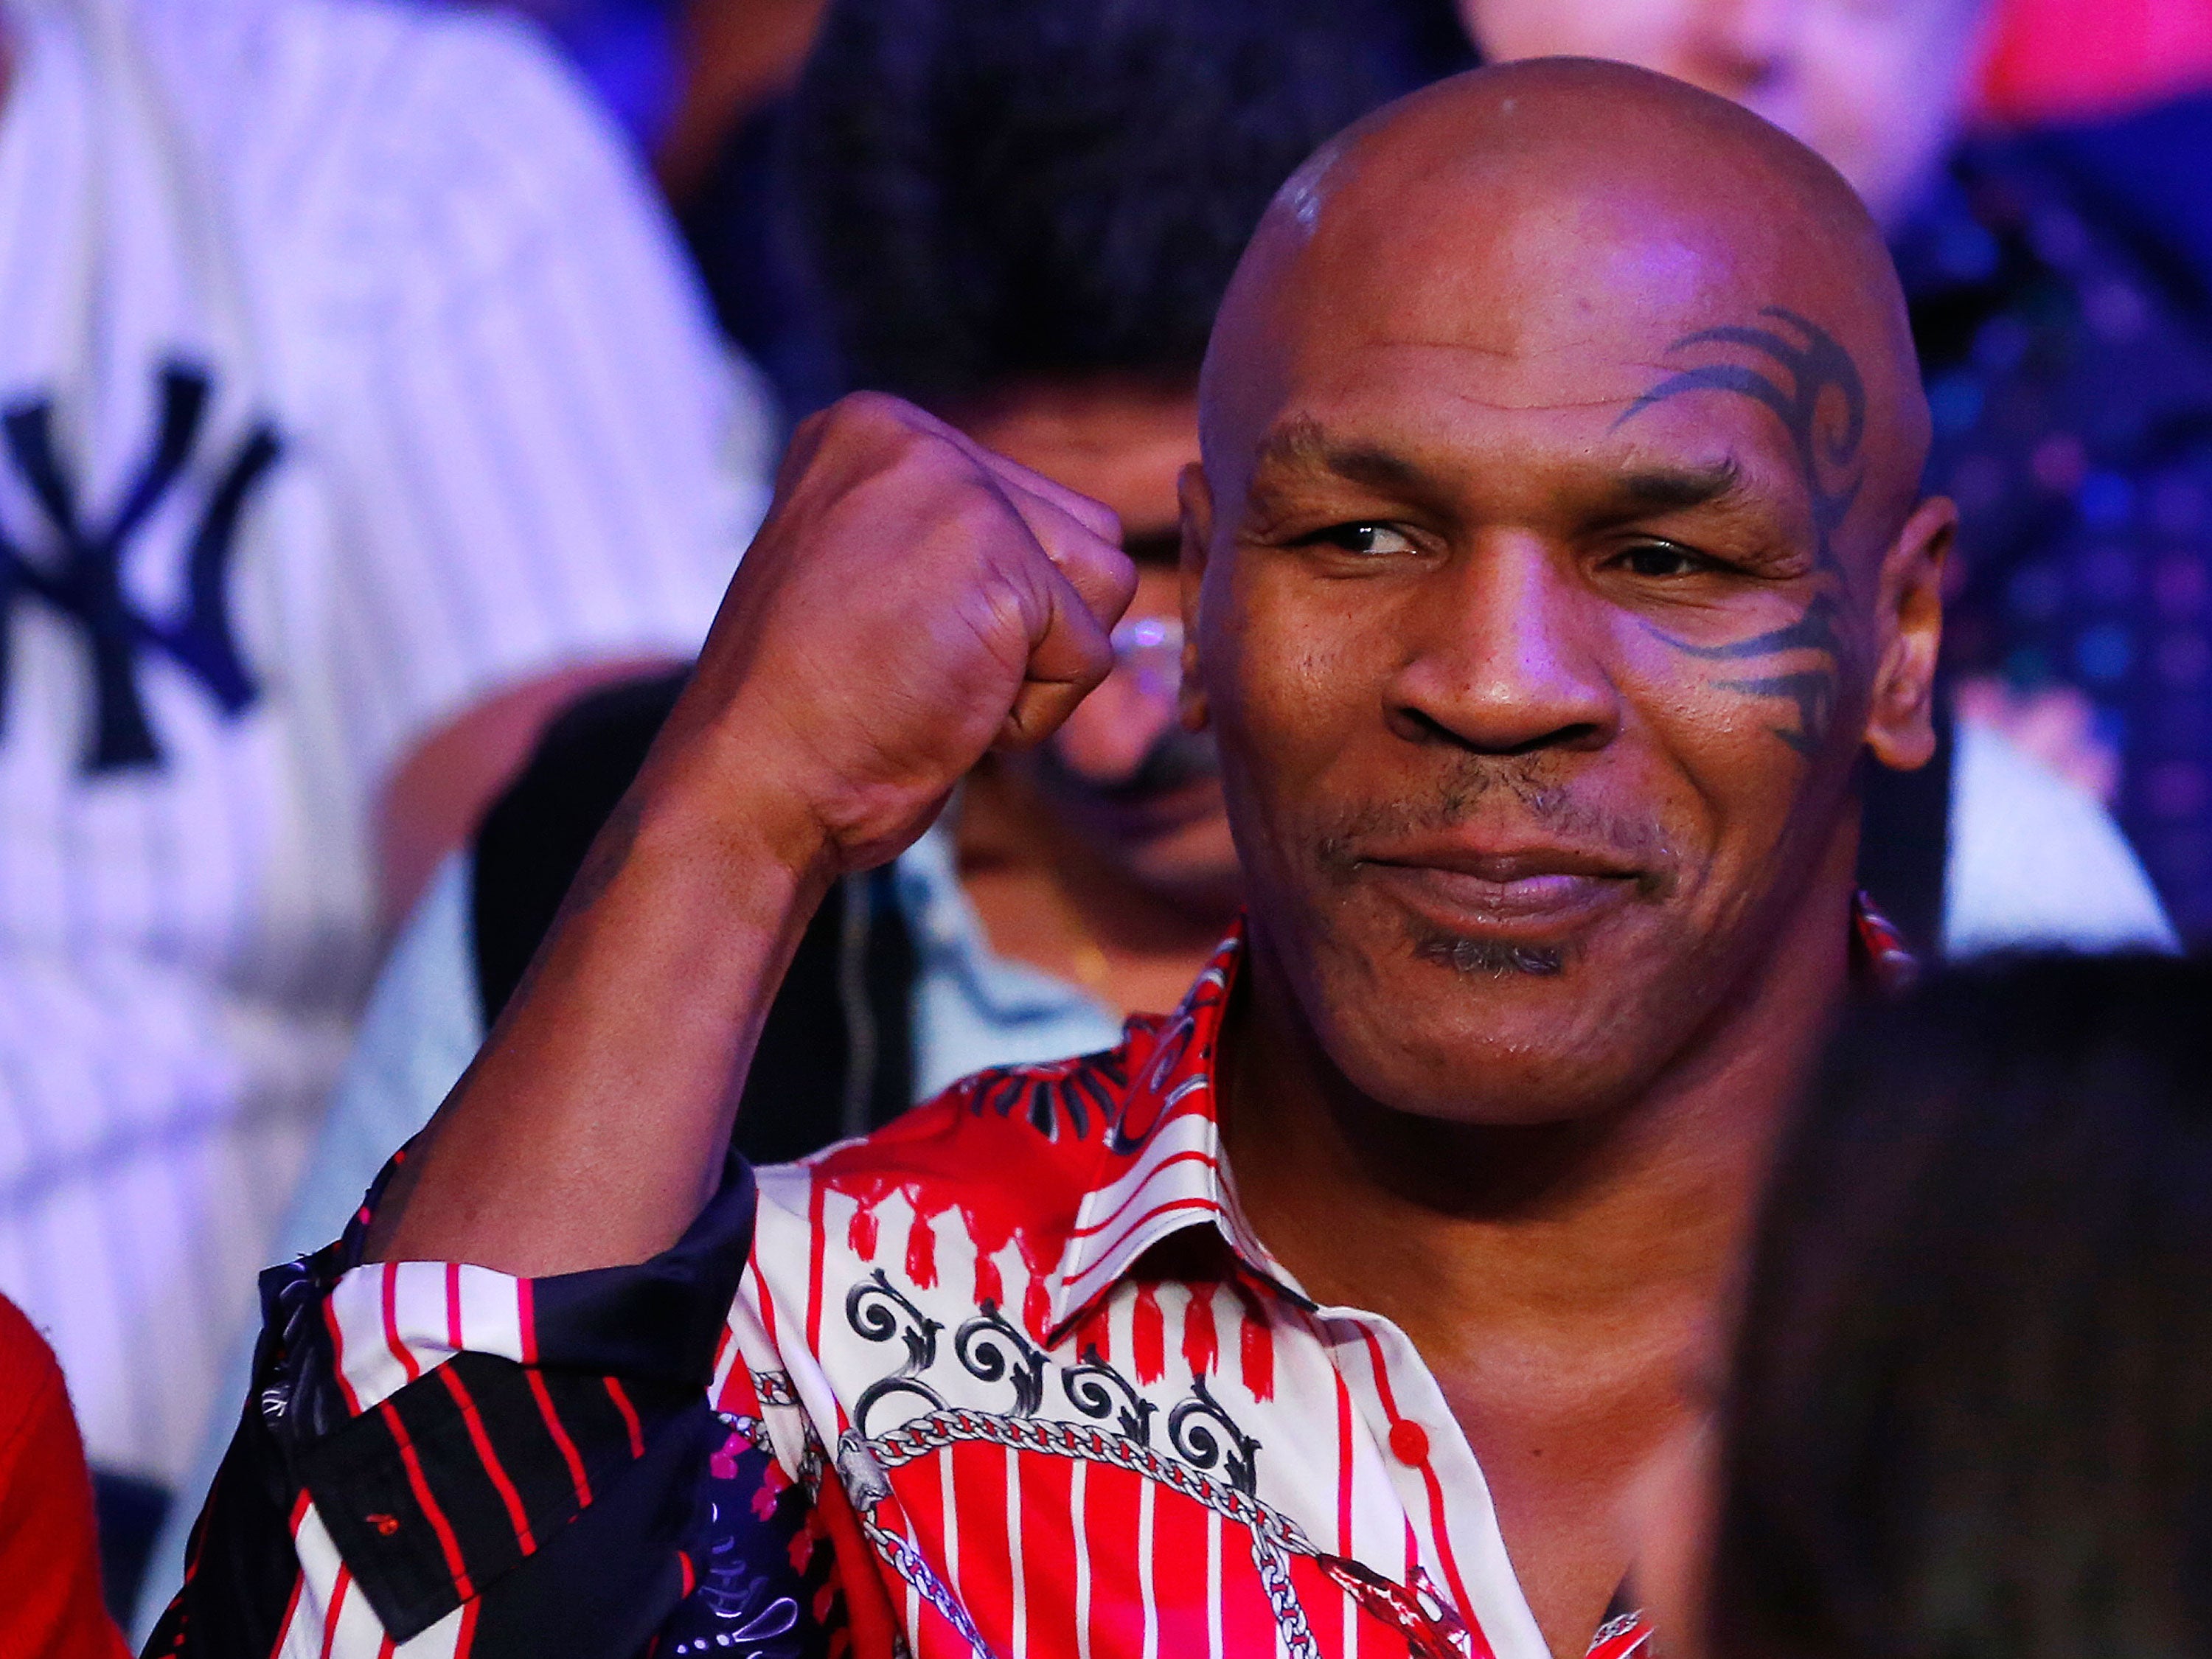 Former Heavyweight boxing champ Mike Tyson attends the fight between Miguel Cotto and Sergio Martinez on June 7, 2014 at Madison Square Garden in New York City. Cotto won by a TKO in the ninth round.